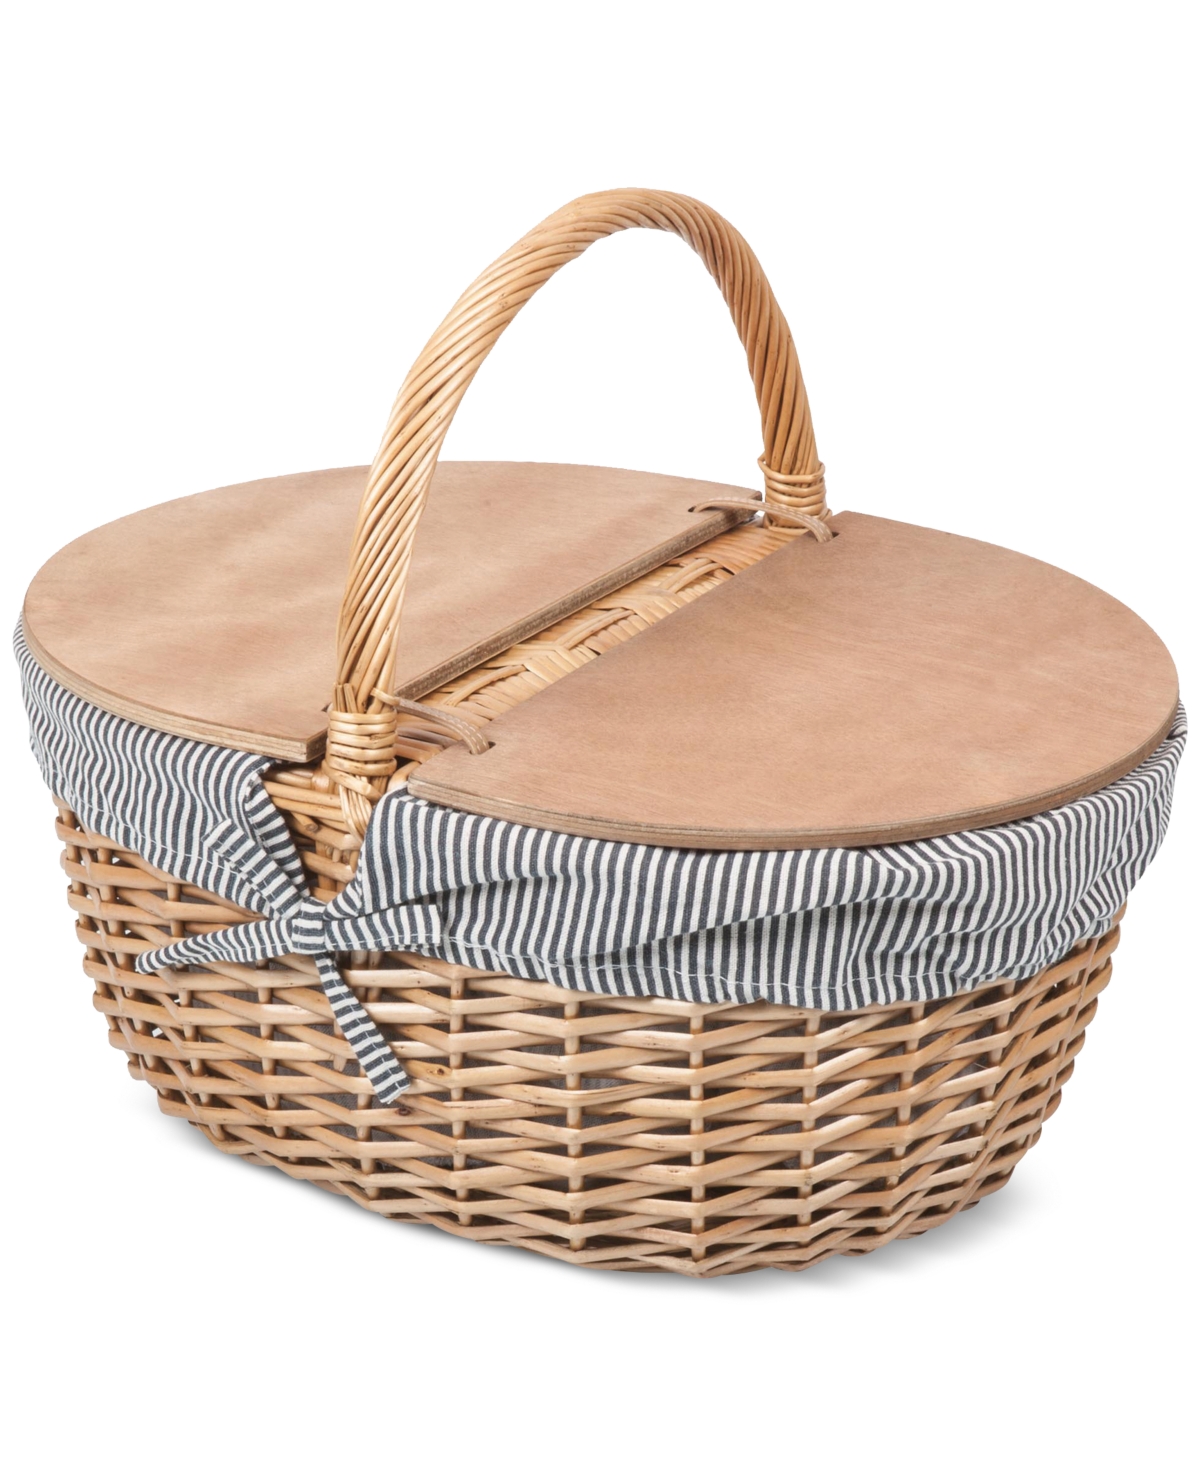 PICNIC TIME COUNTRY NAVY & WHITE STRIPED PICNIC BASKET